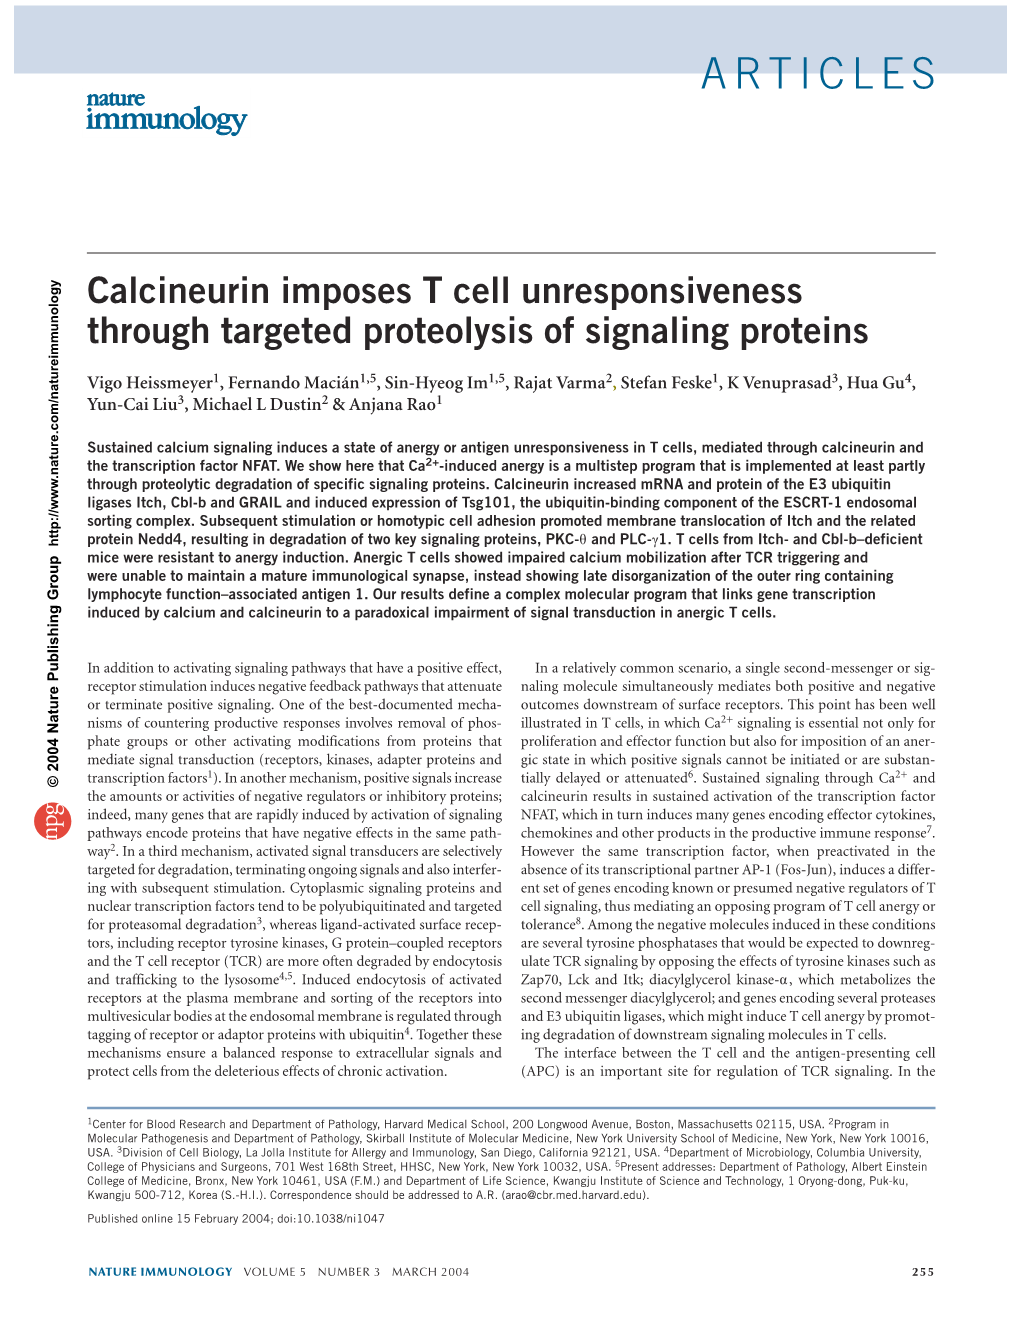 Calcineurin Imposes T Cell Unresponsiveness Through Targeted Proteolysis of Signaling Proteins